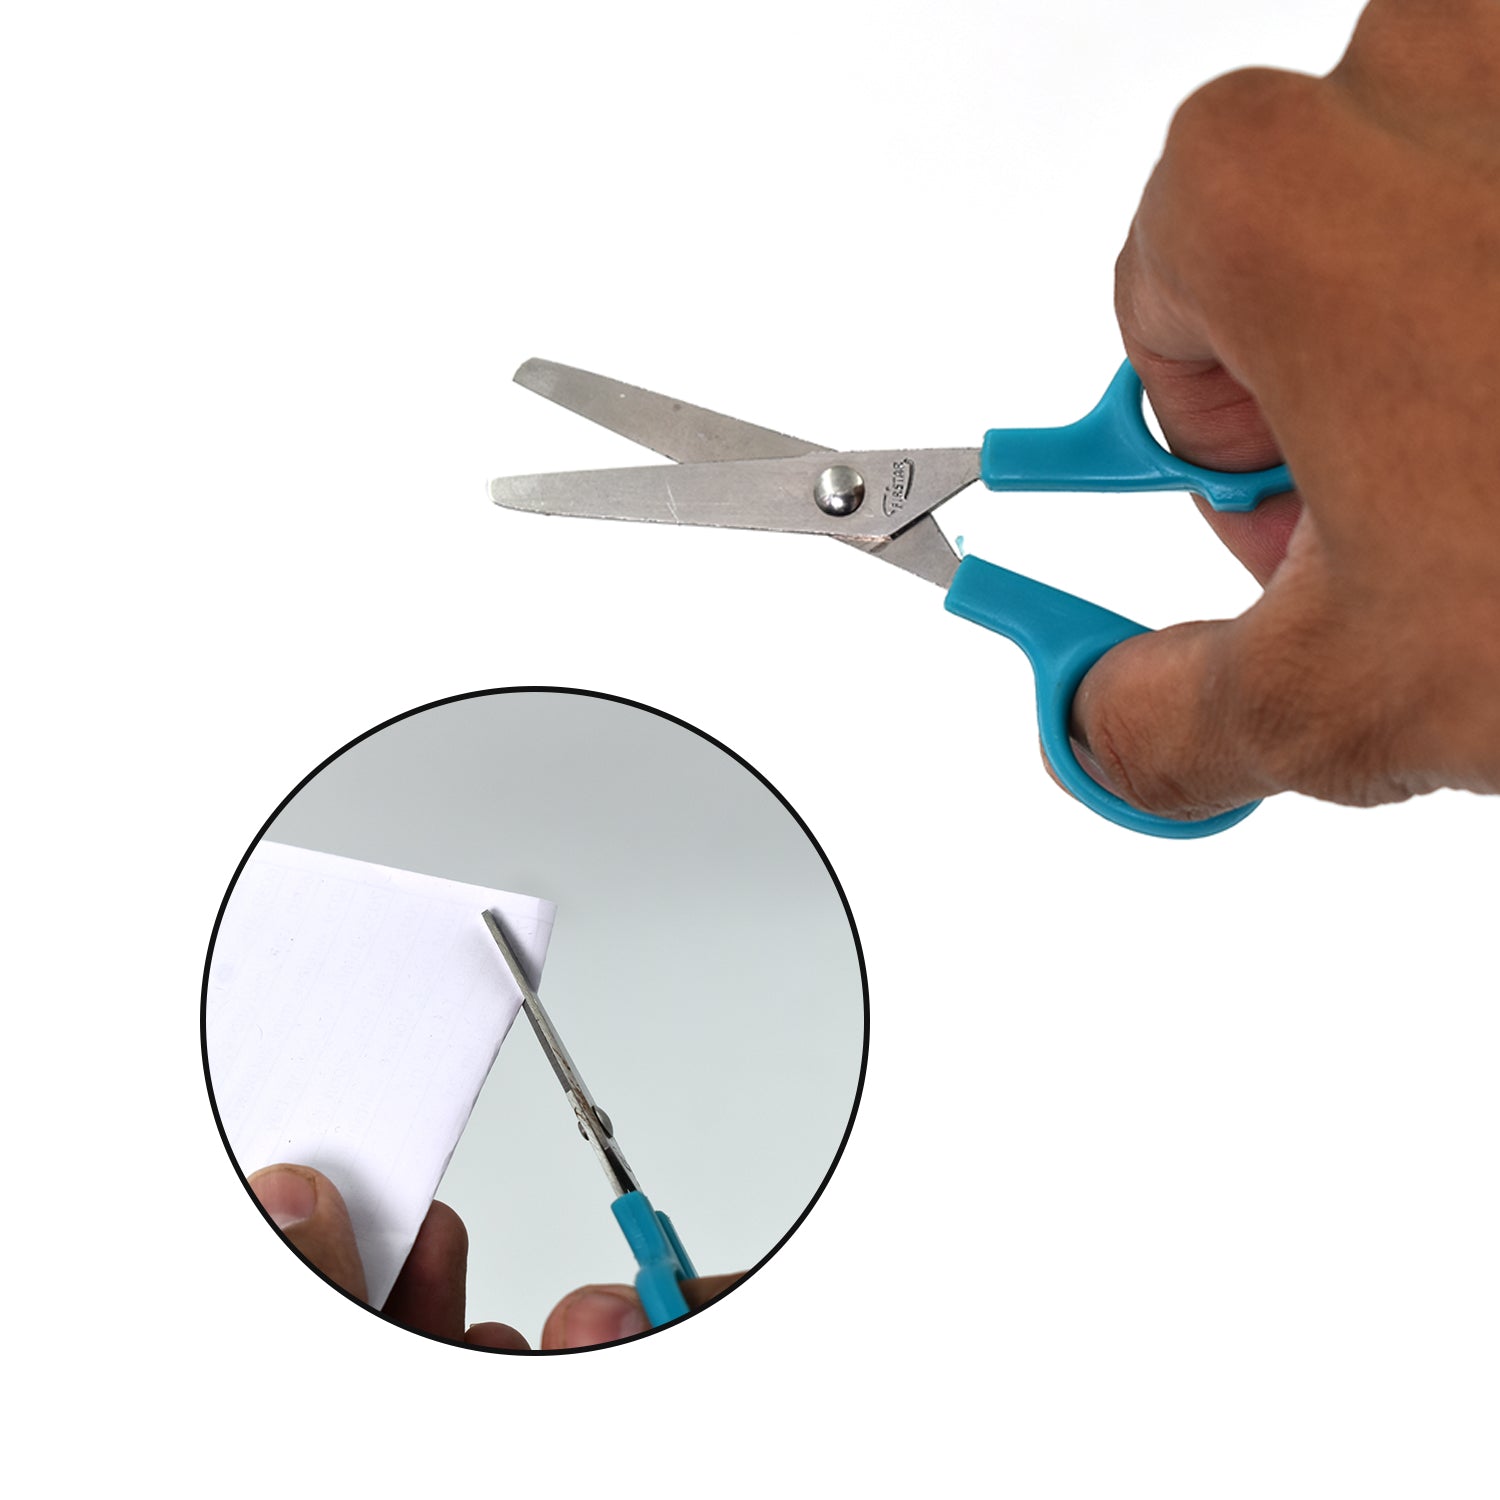 7621 Cn Mini Scissor No.1 For Cutting And Designing Purposes By Students And All Etc. DeoDap